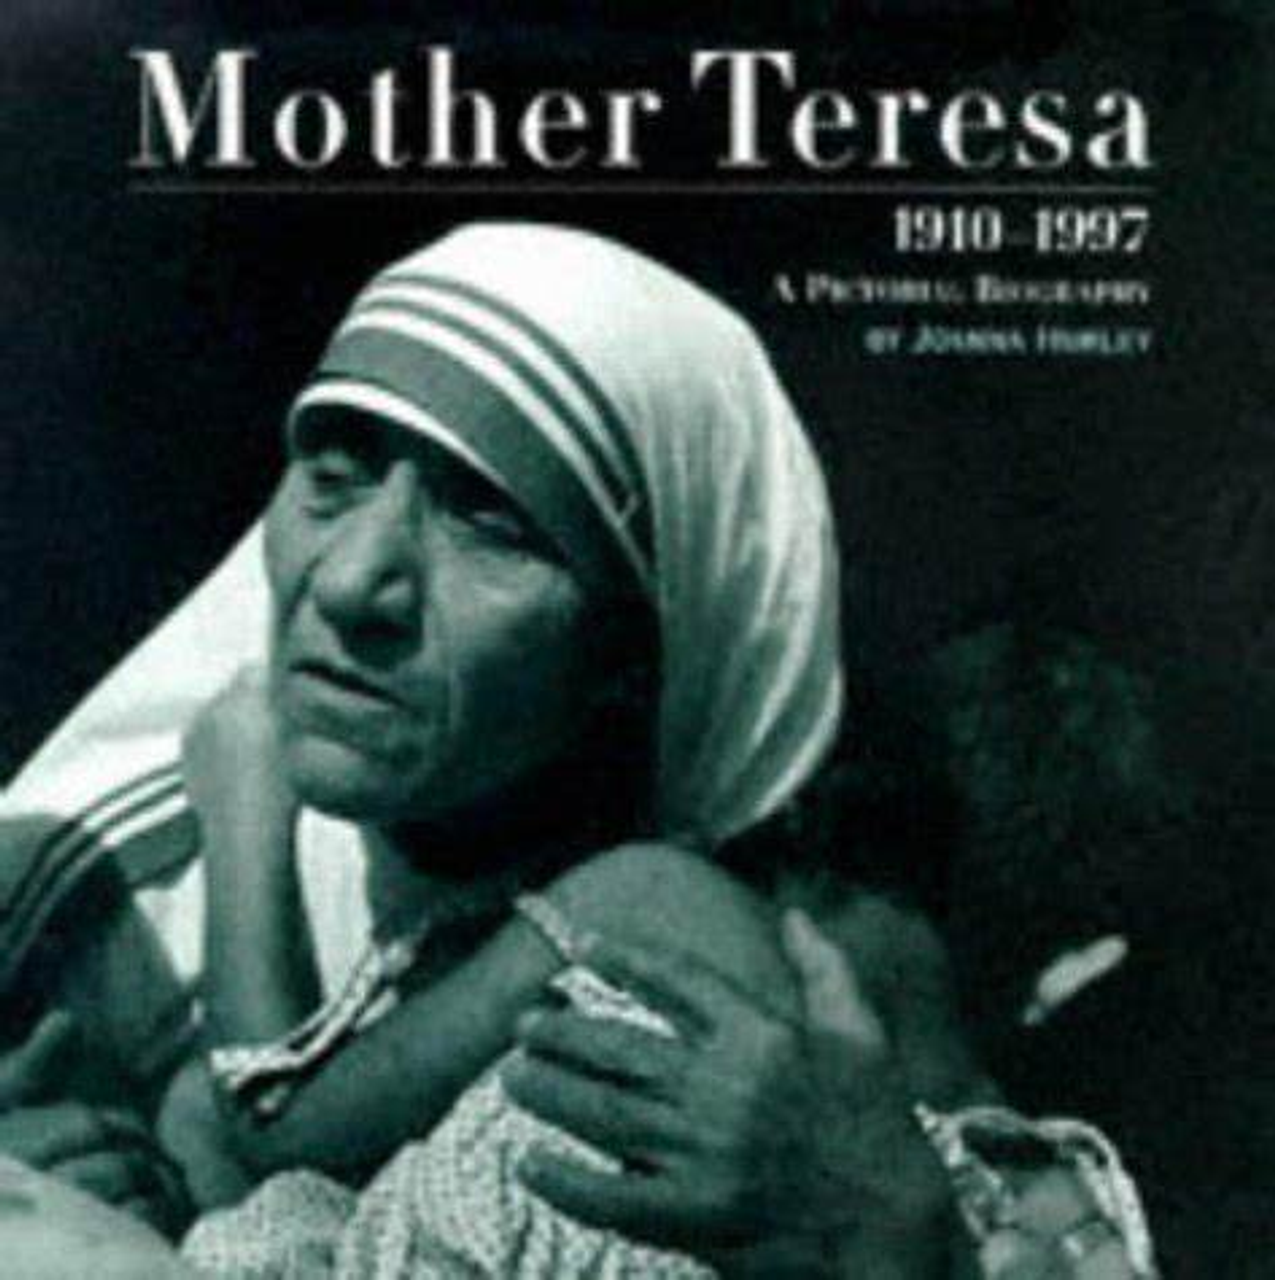 Mother Teresa A Pictorial Biography by Joanna Hurley